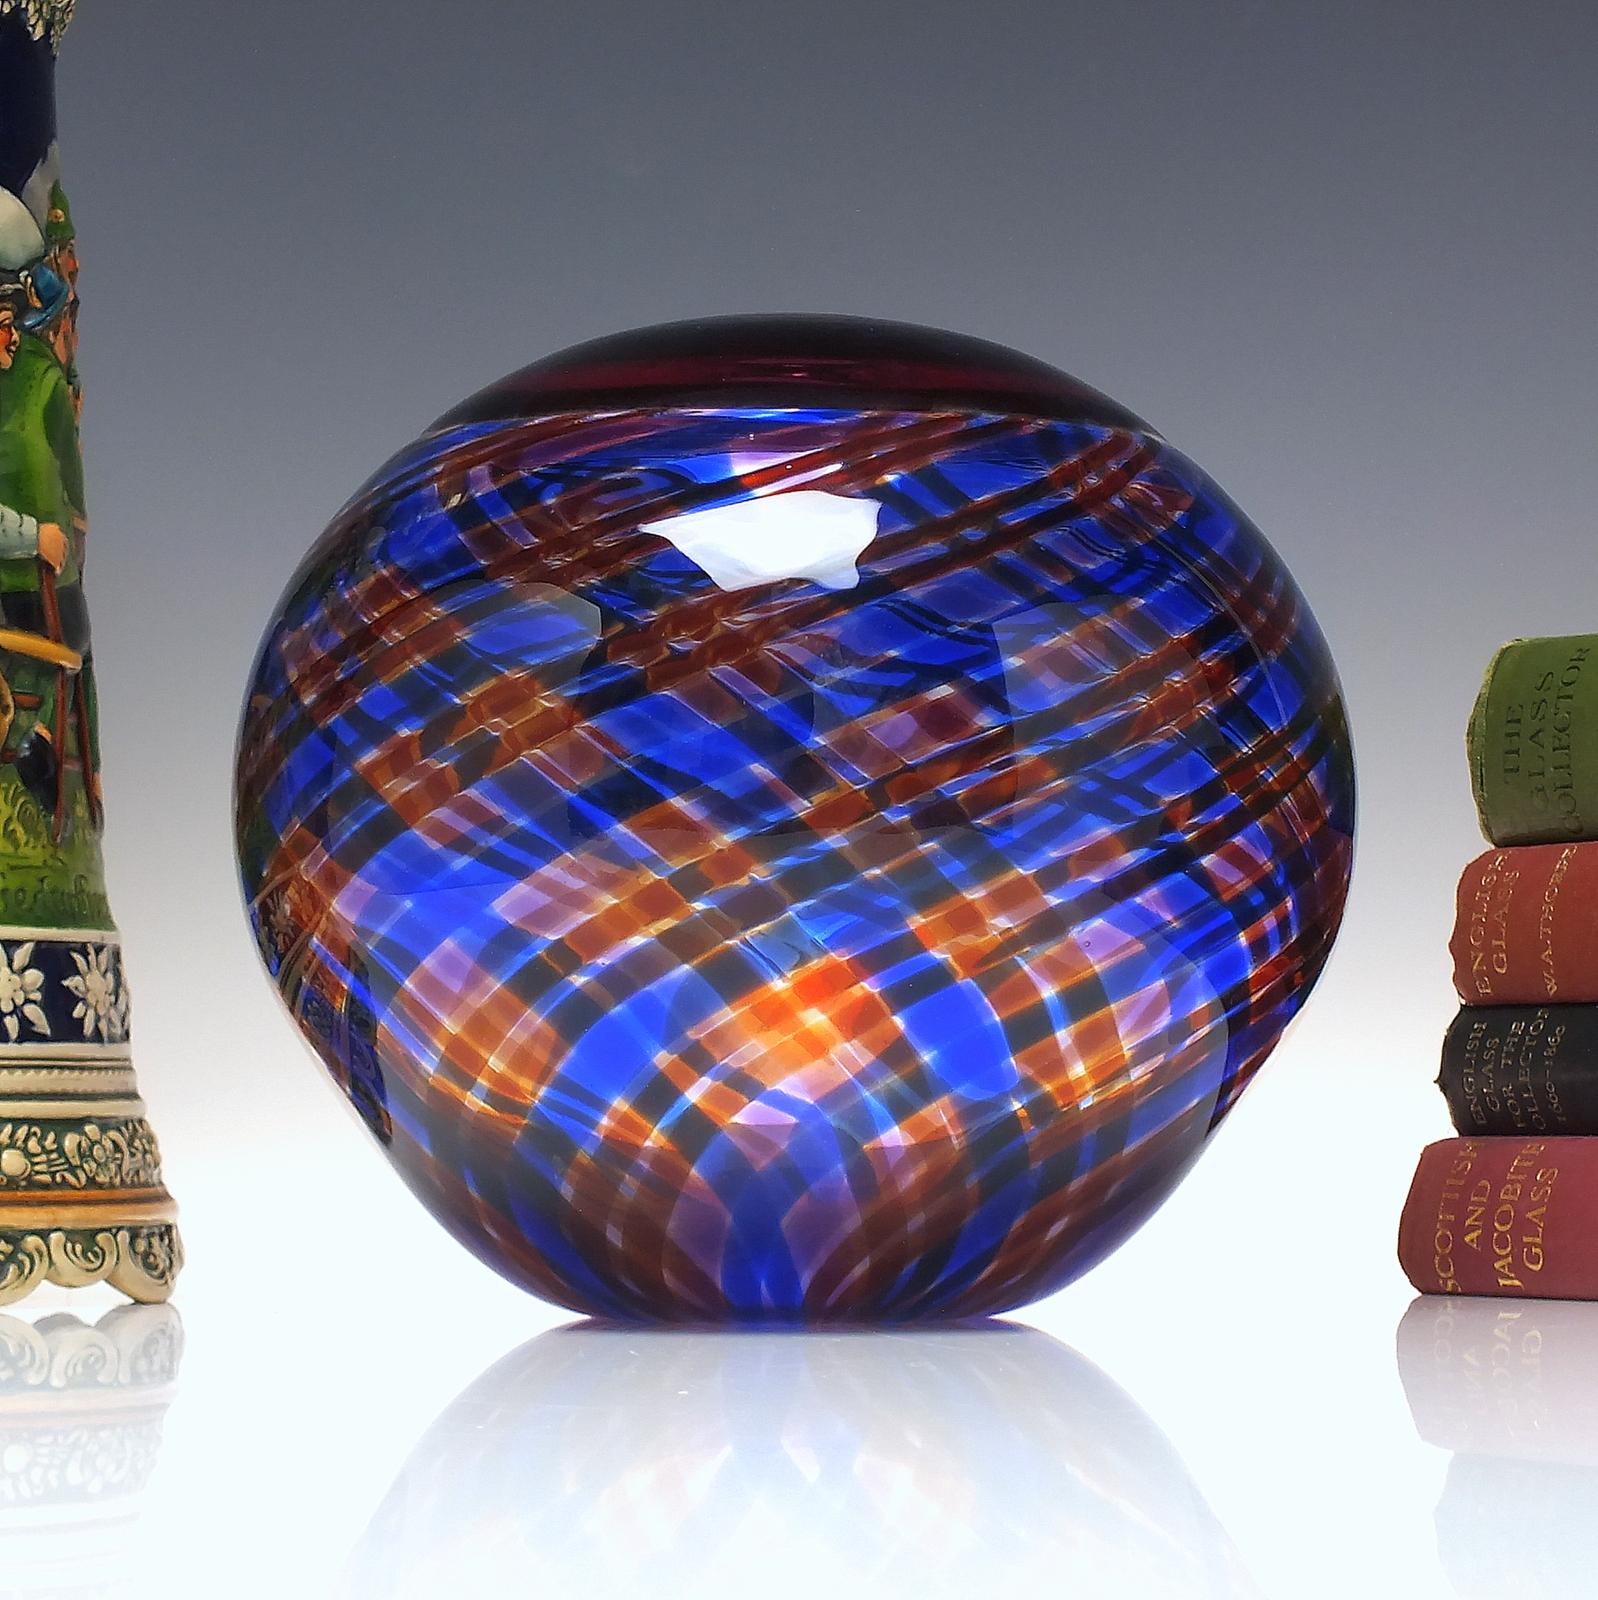 A Mike Hunter Clanonball. The body is made from two pieces of glass one red/amber, the other clear glass with internal amethyst, blue and red tartan trailing. The pieces have been fused together using the incalmo technique. The base is signed M